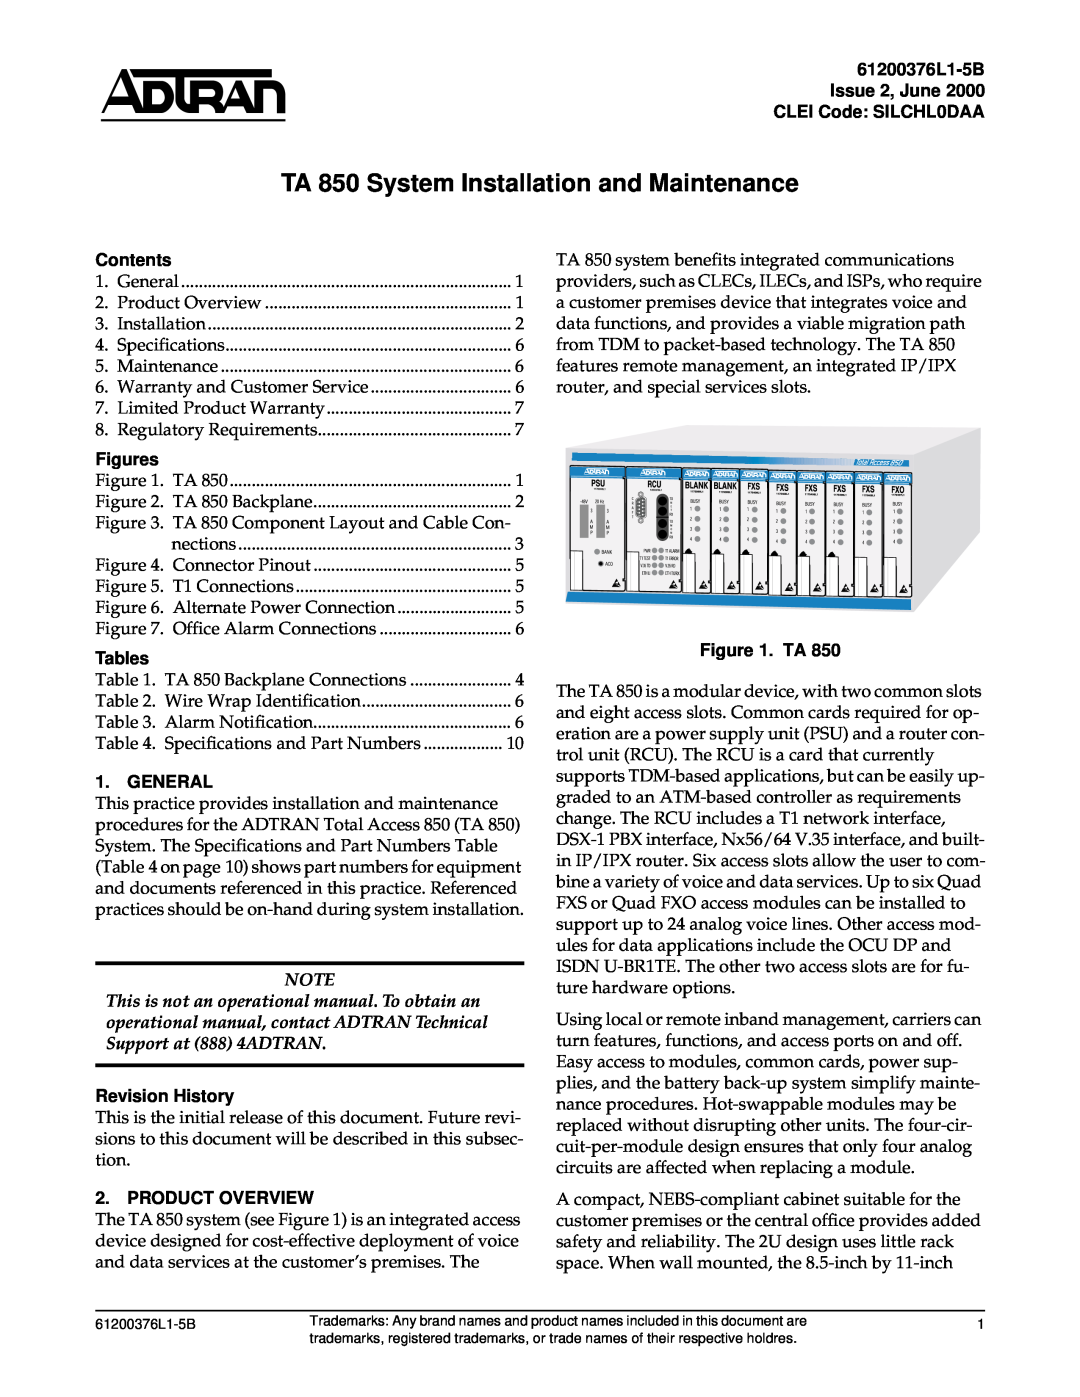 ADTRAN 850 specifications 61200376L1-5B Issue 2, June 2000 CLEI Code SILCHL0DAA, Contents, Figures, Tables, General 